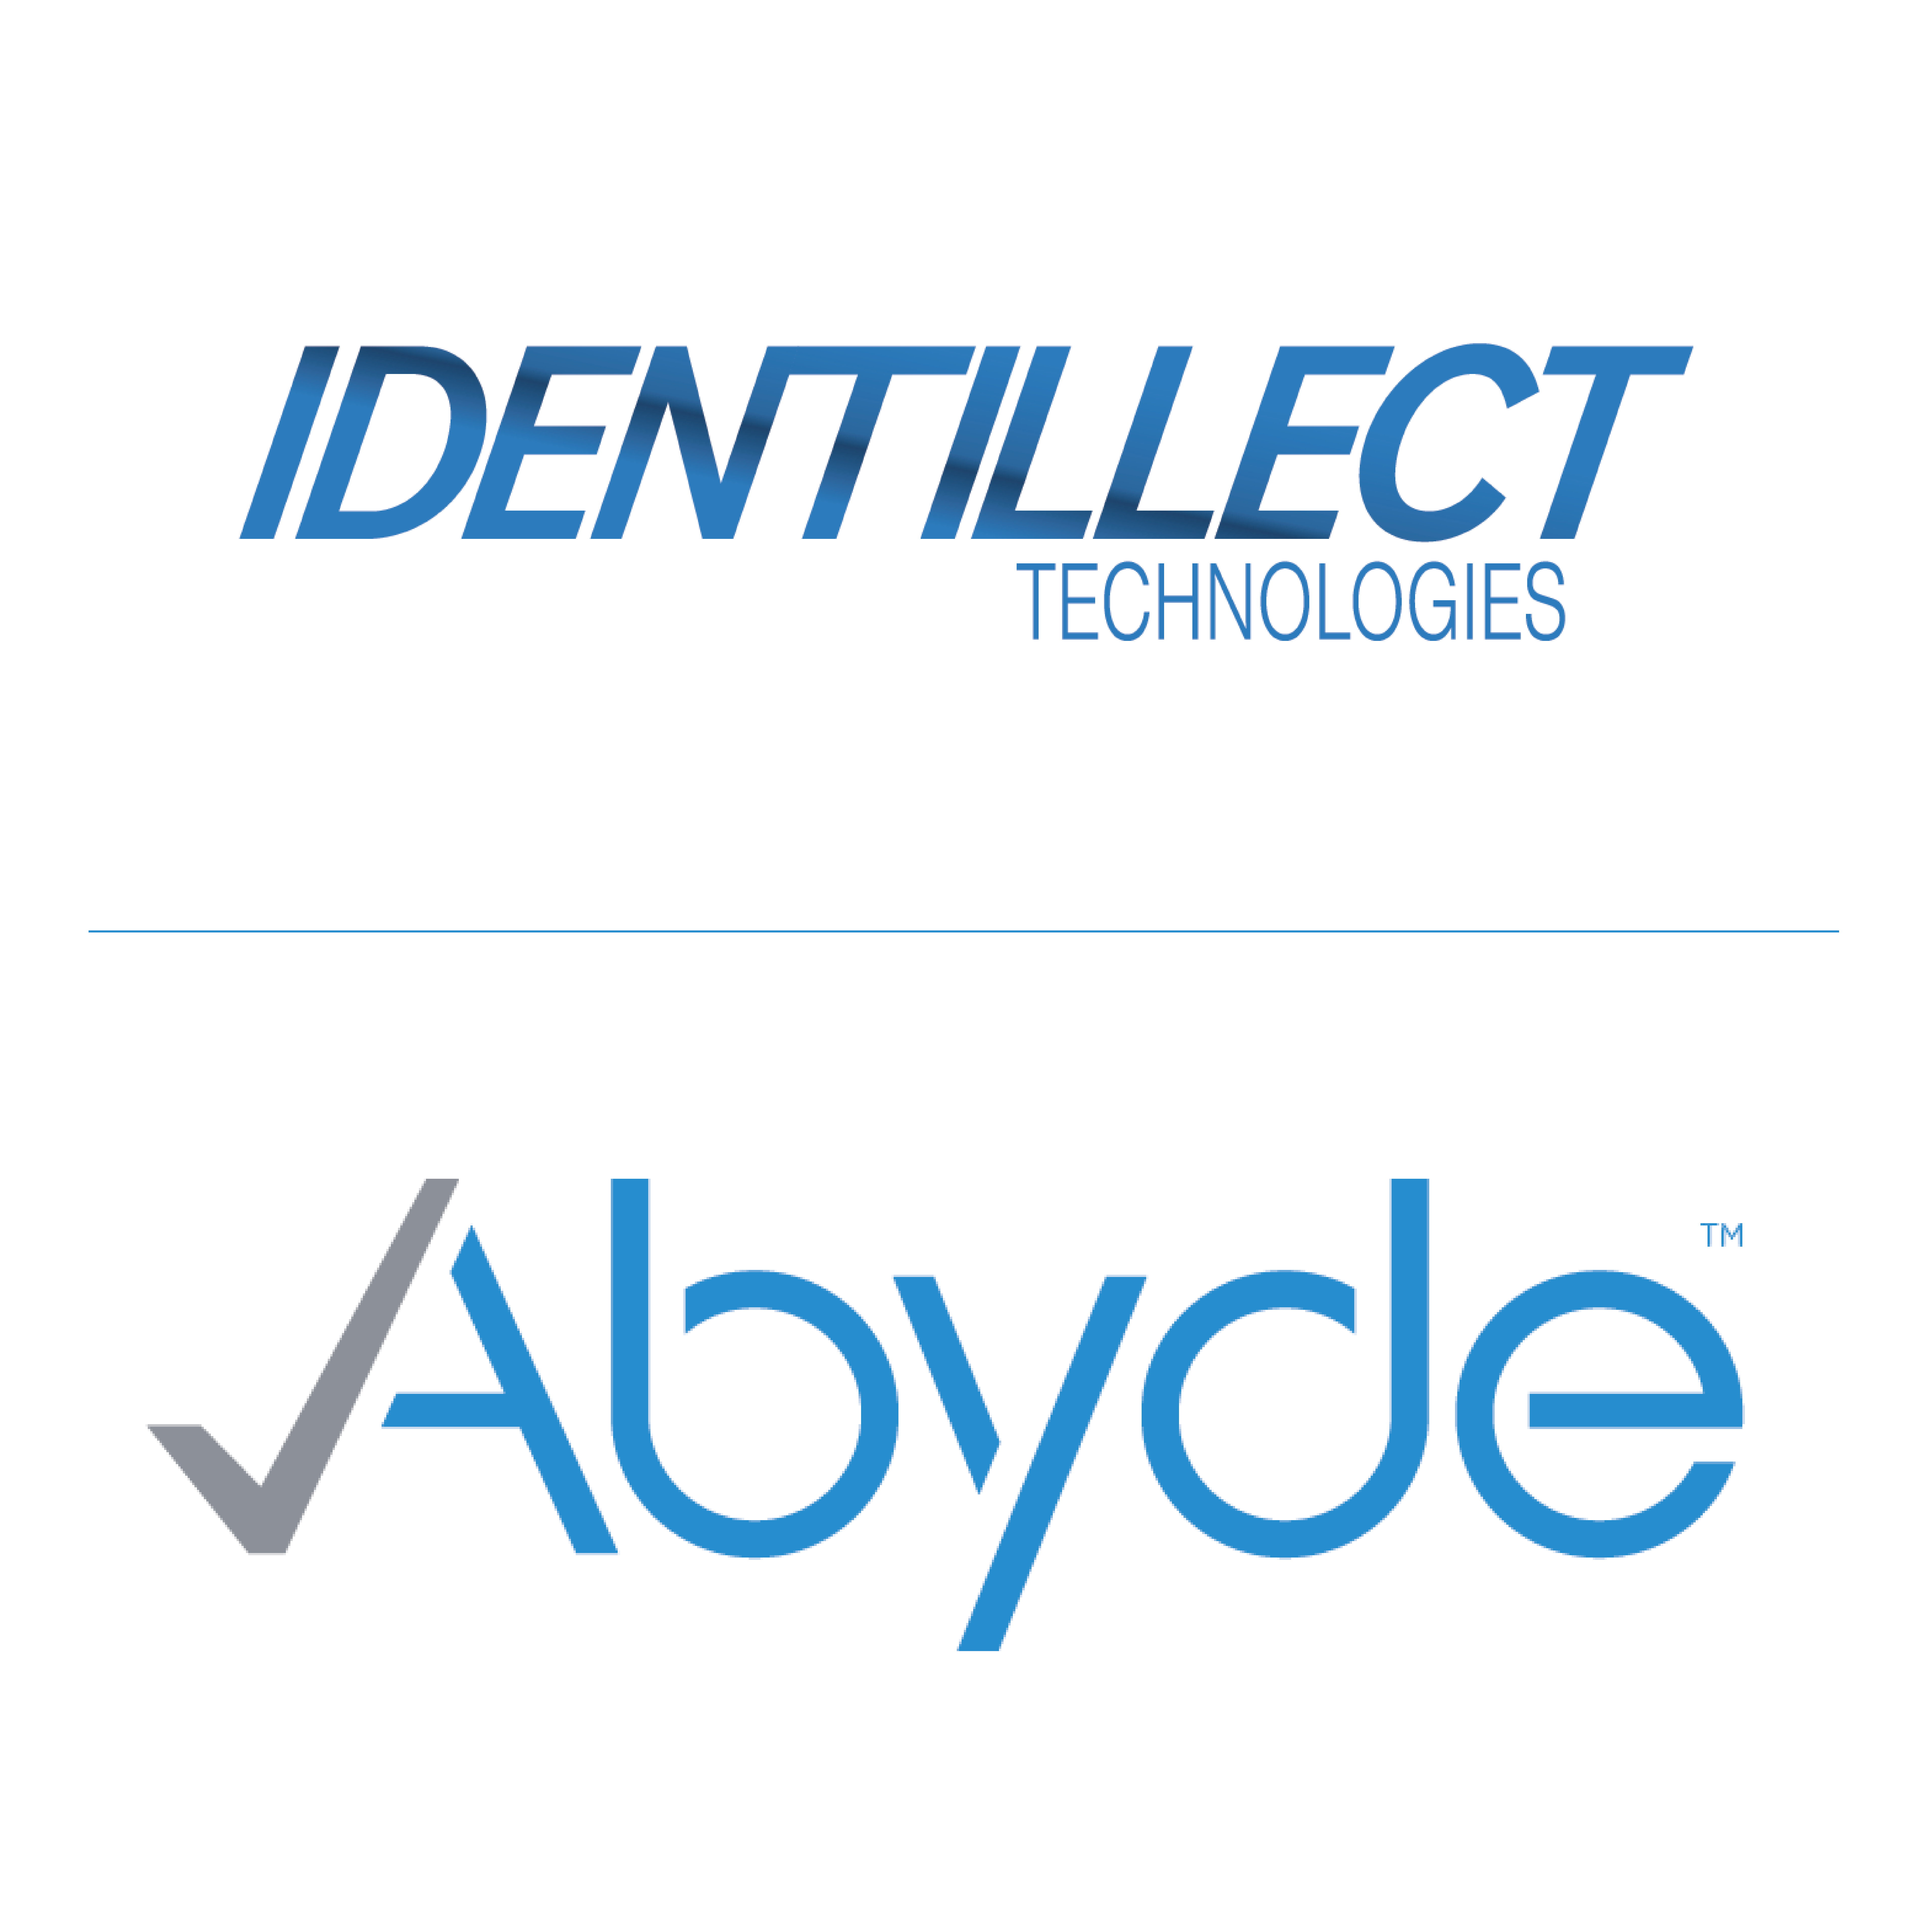 Abyde and Identillect partner bringing their compliance and security solutions together to serve the healthcare industry